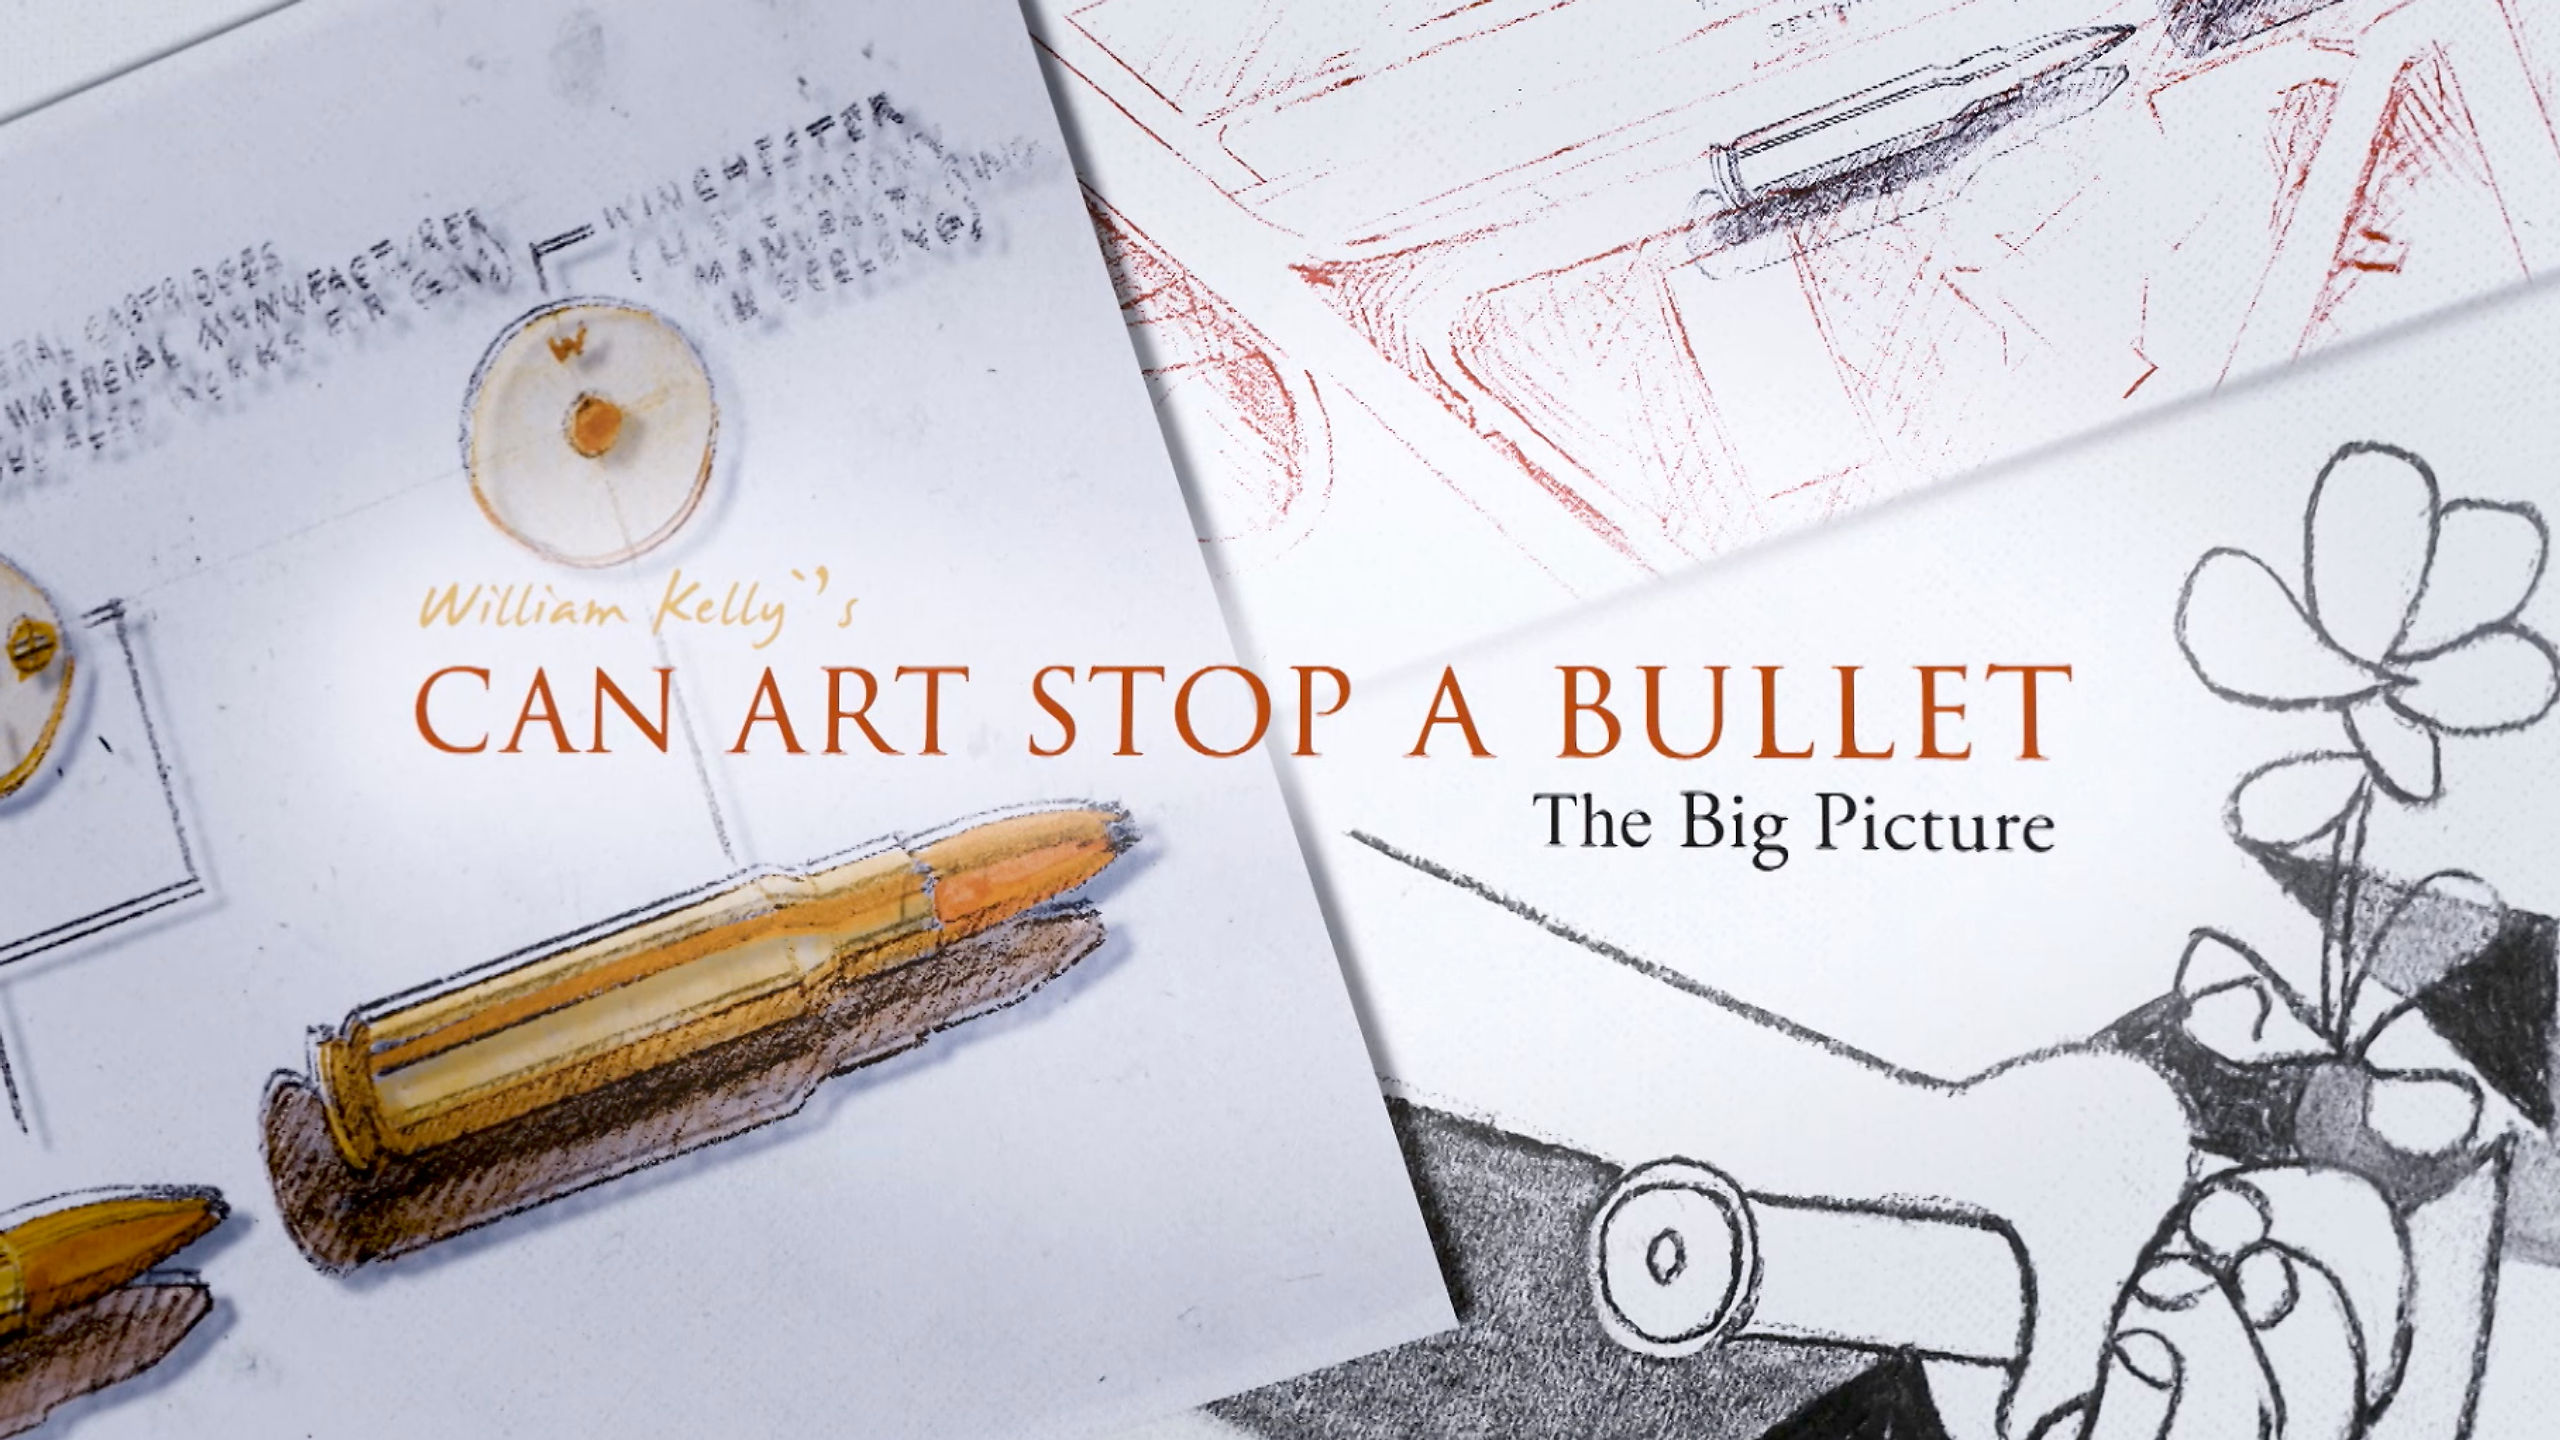 William Kelly's Can Art Stop A Bullet? The Big Picture - Trailer Sept 2019